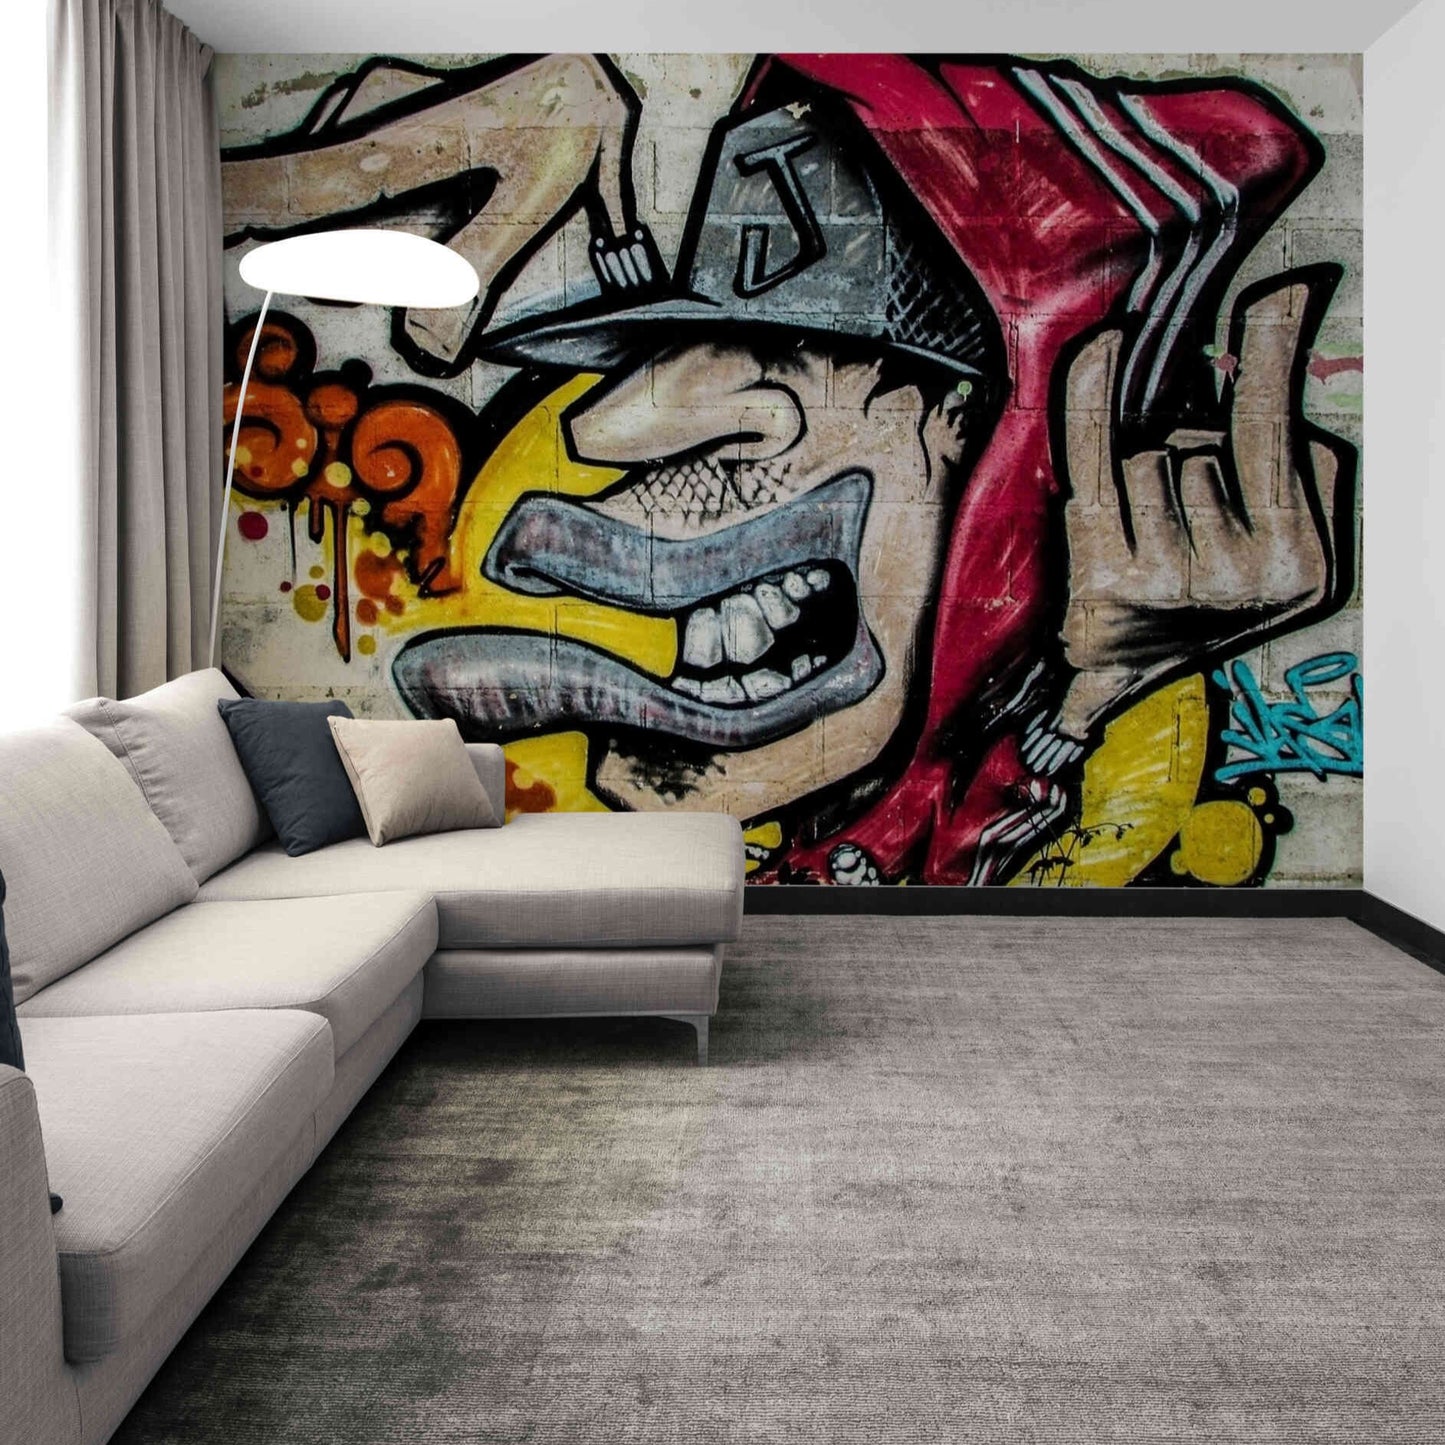 Legends of rap immortalized in vibrant graffiti on a wall mural, celebrating hip-hop culture."